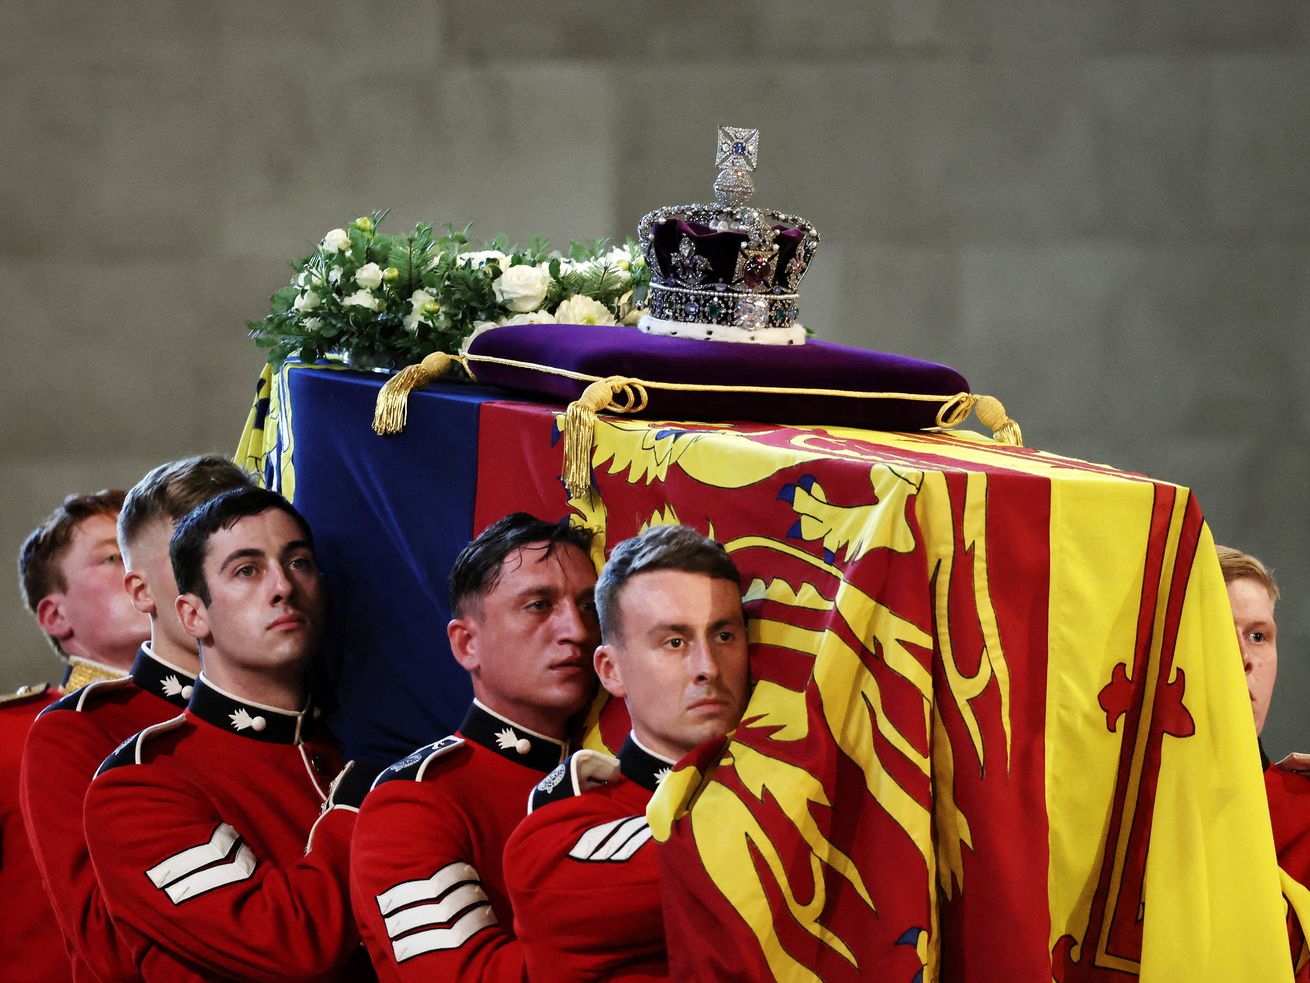 The queen’s funeral (plus what’s happening with the money and the corgis), explained